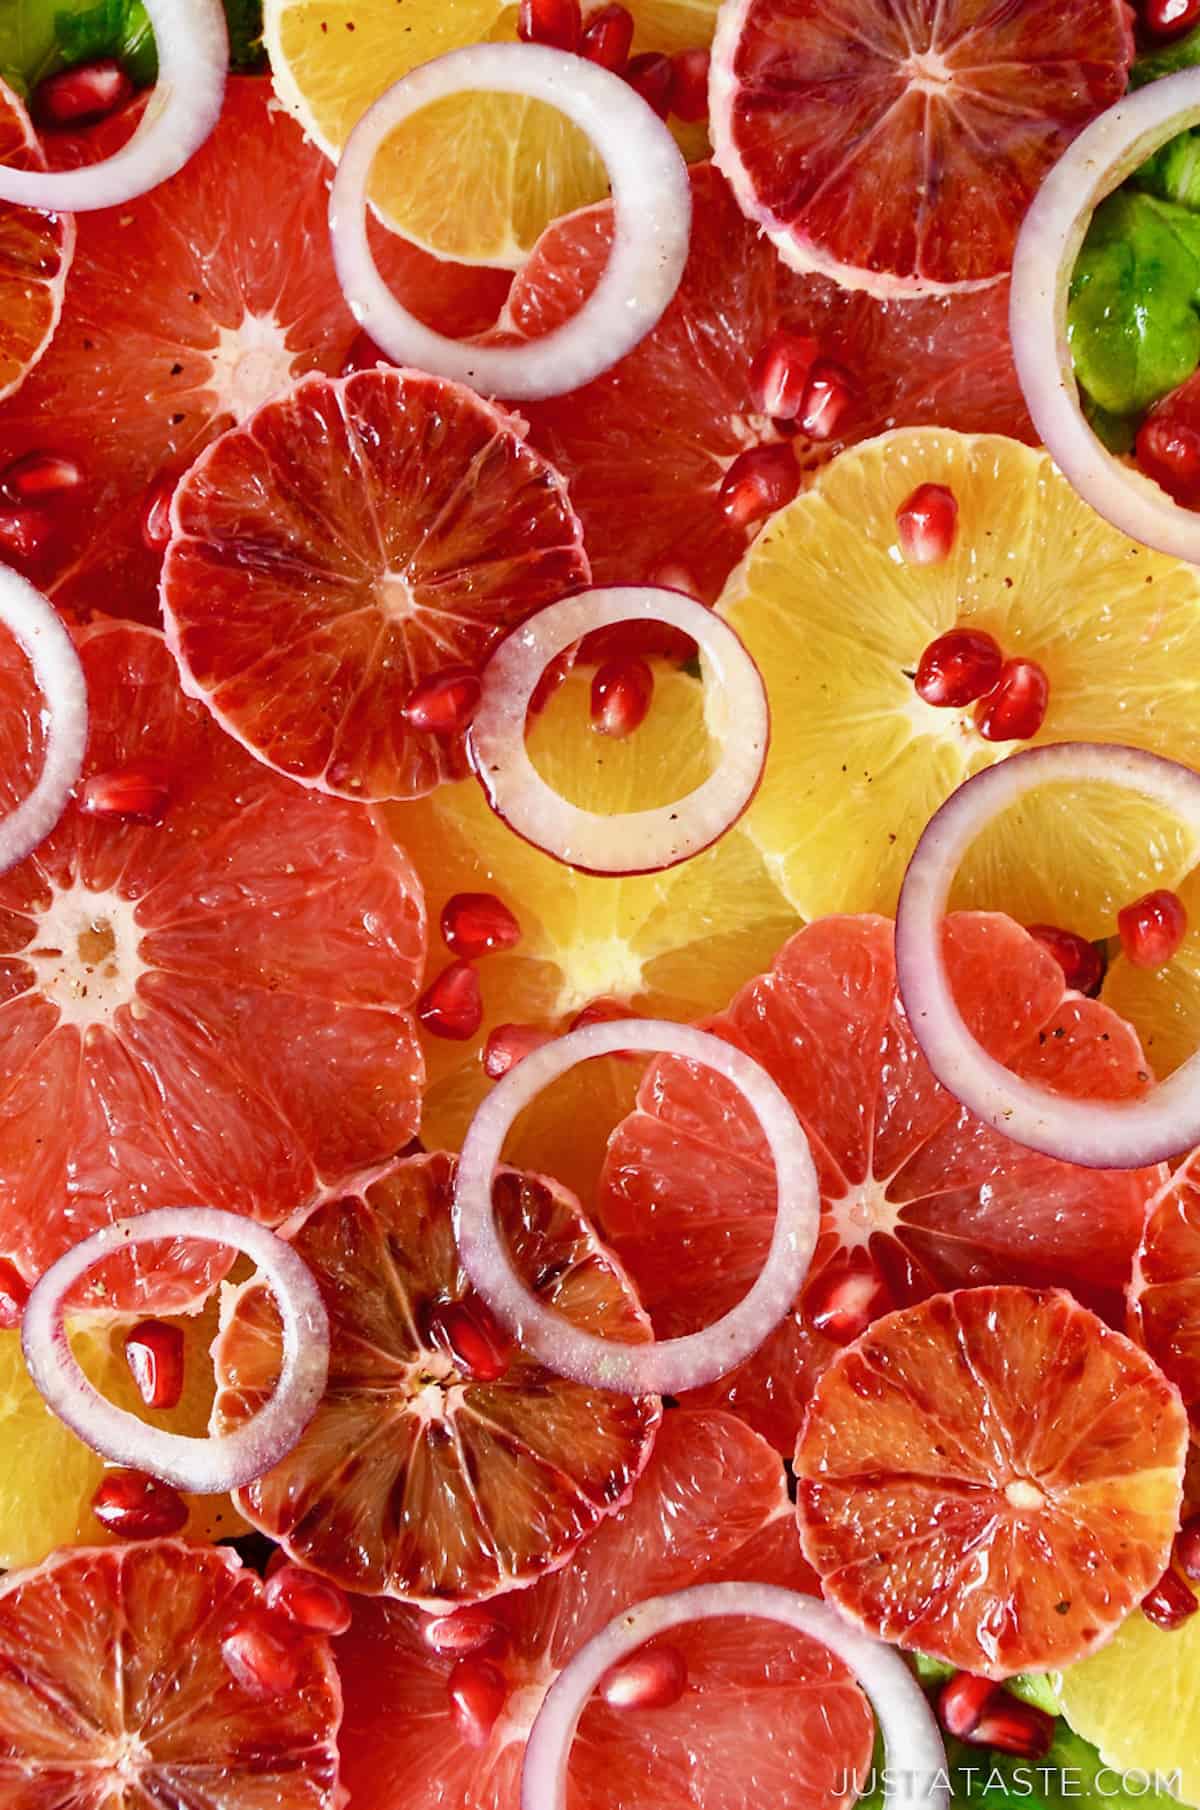 A salad made up of layers of sliced oranges, blood oranges and grapefruits, red onion slices, arugula and pomegranate seeds.